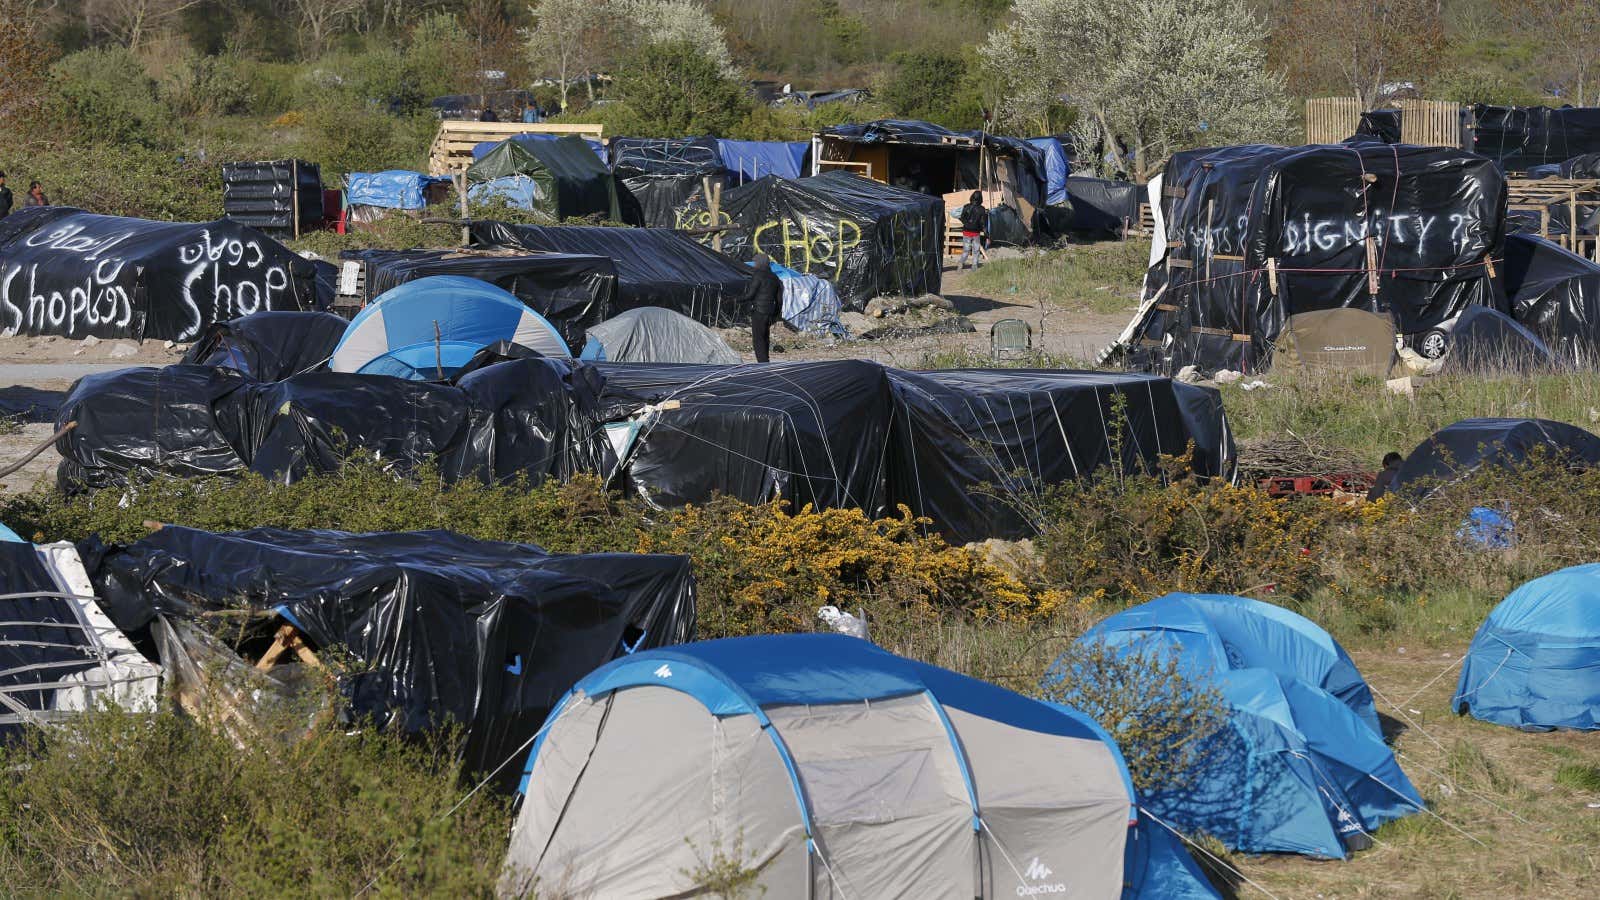 The unsustainable situation in Calais, France.